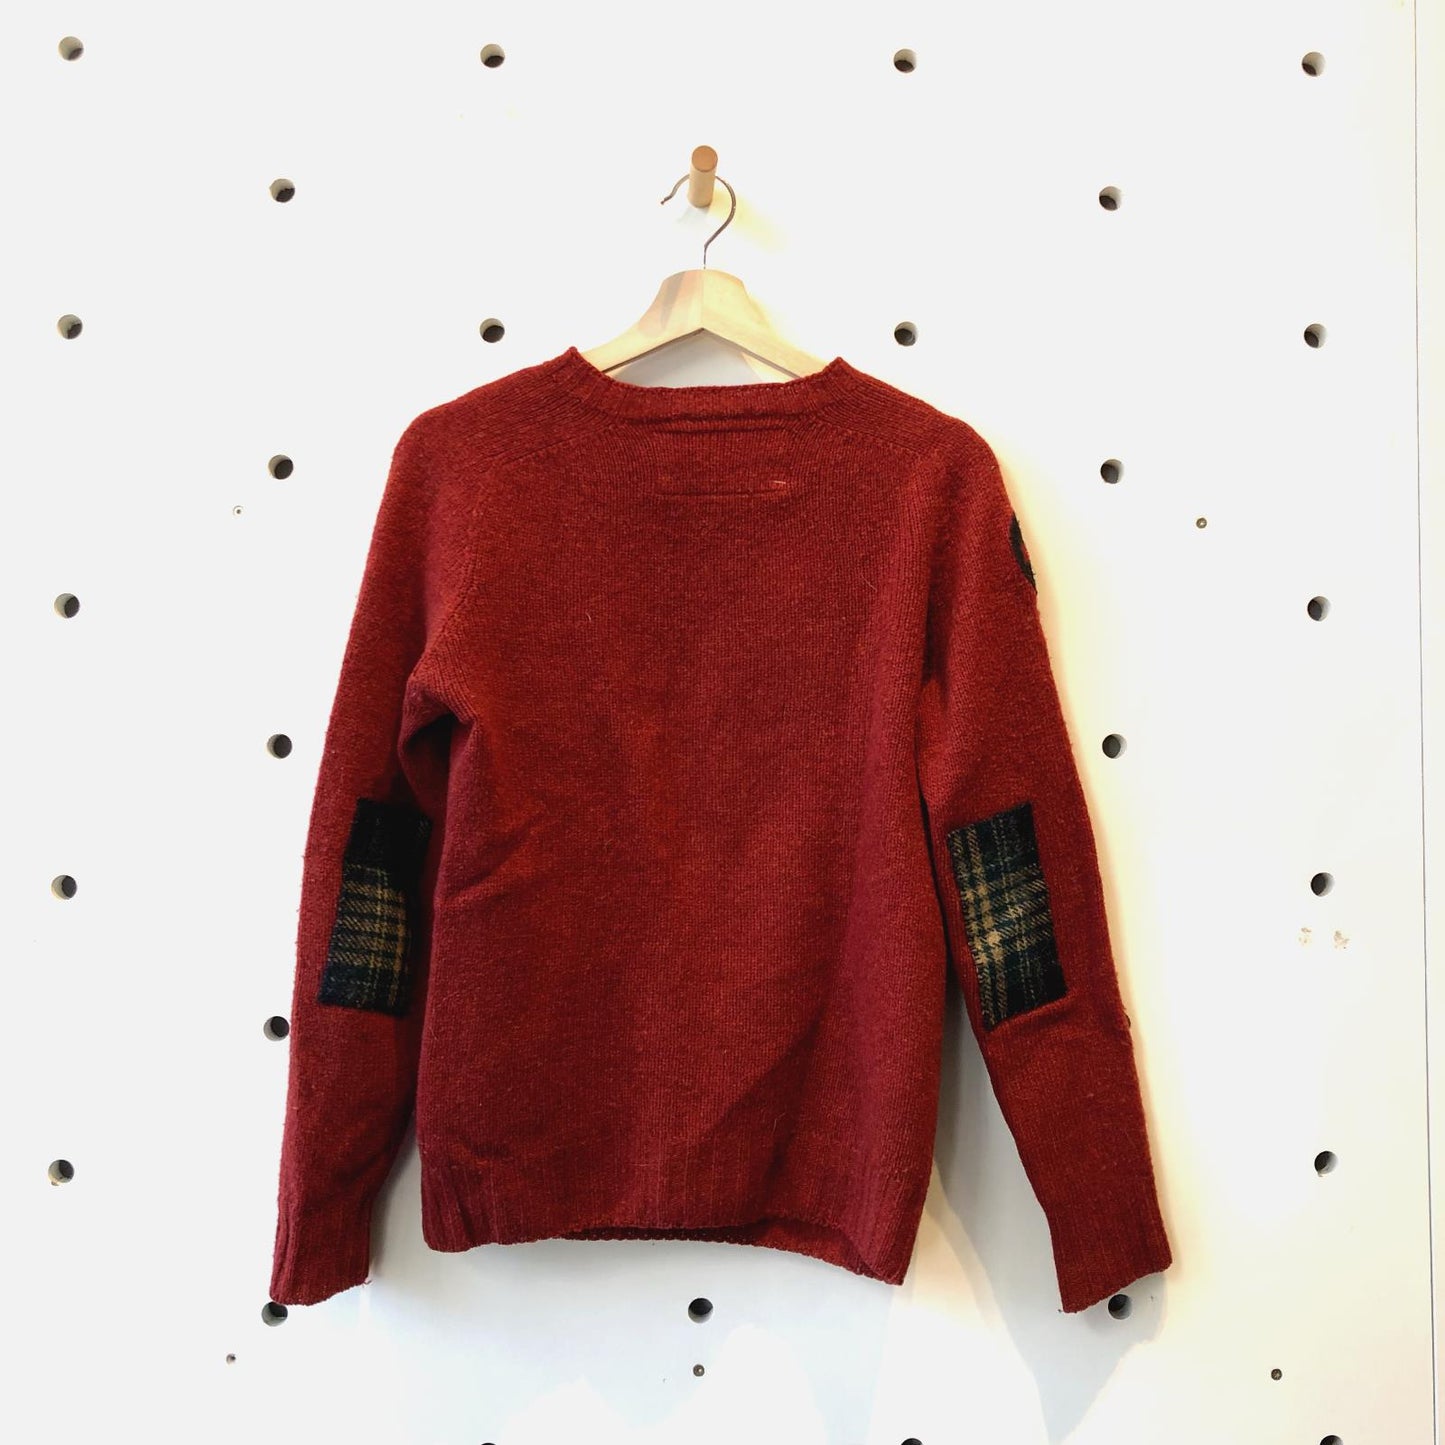 1 / S - Free City Sending Light Red 100% Wool Elbow Patch Sweater 1228SP